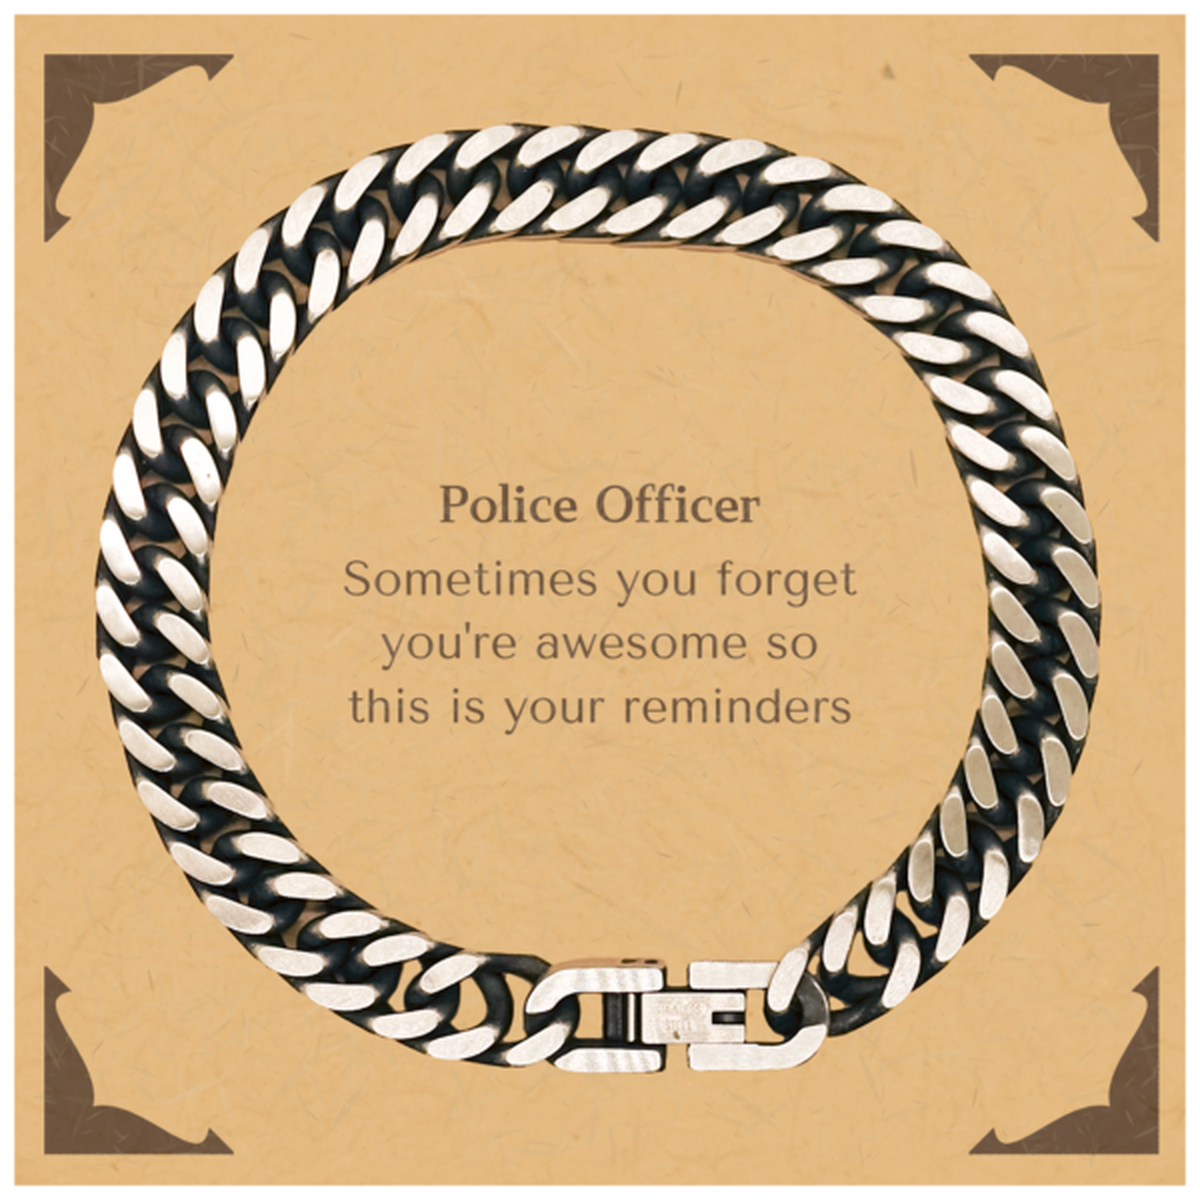 Sentimental Police Officer Cuban Link Chain Bracelet, Police Officer Sometimes you forget you're awesome so this is your reminders, Graduation Christmas Birthday Gifts for Police Officer, Men, Women, Coworkers